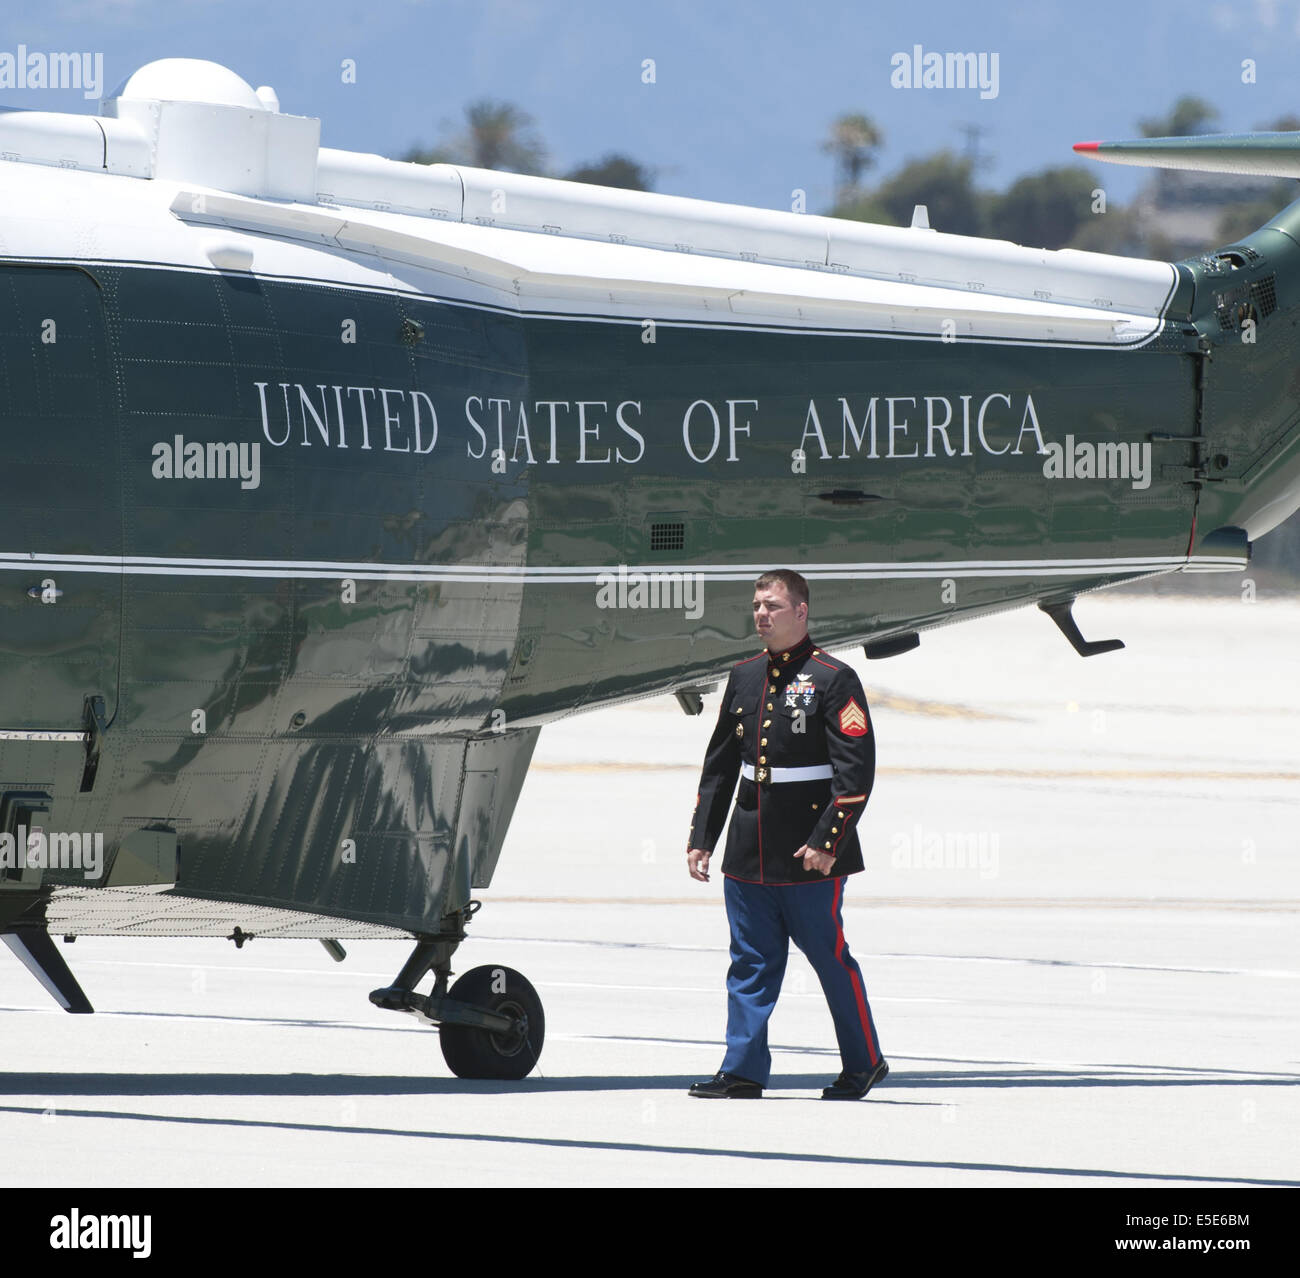 July 23, 2014 - Los Angeles, California, U.S - Marine One --- Marine One on the tarmac at LAX on Wednesday July 23, 2014, as a Marine Sergeant from HMX-1 makes an inspection.  Sikorsky's SH-3 Sea King helicopter has been in use by the US Marine Corps' HMX-1 squadron as the first choice for Marine One since not long after it was placed in service by the US Navy in 1961.  The familiar metallic green with white top Sea King is transported, along with the presidential limousine and other large equipment via a set of several C-17 Boeing Globemaster transport aircraft operated by the US Air Force.   Stock Photo